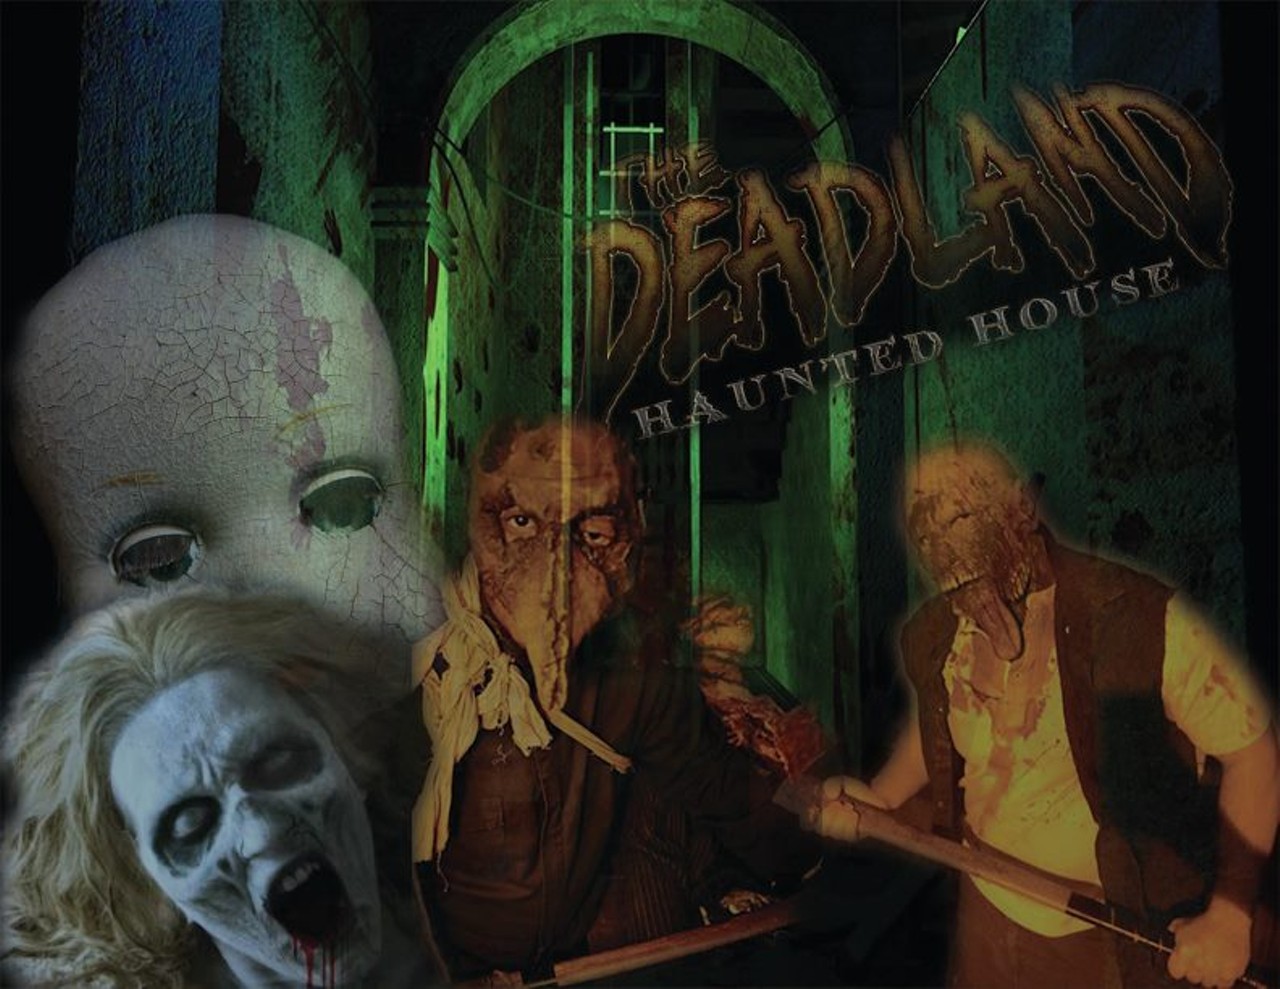  The Deadland Haunted House
You can sign up for this Haunted House online to see if they need volunteers.